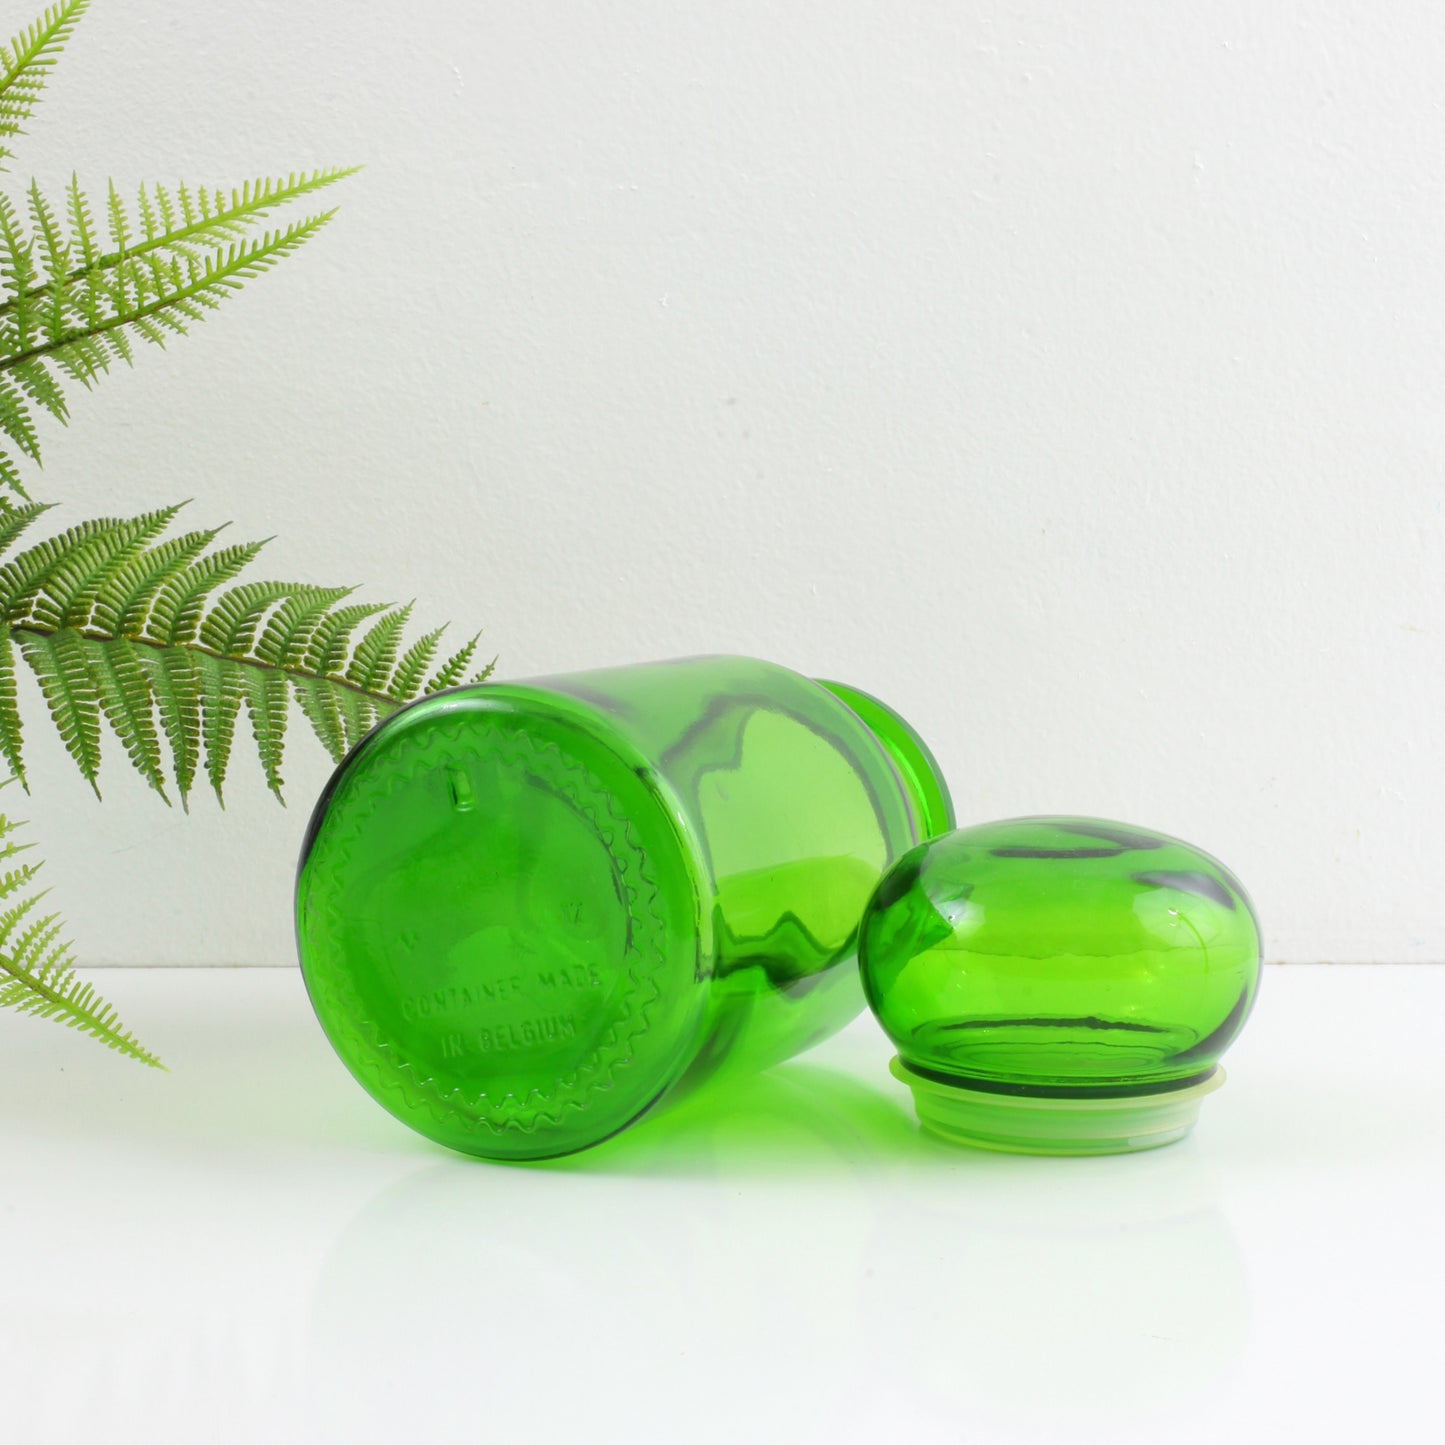 SOLD - Vintage Green Glass Apothecary Jar from Belgium